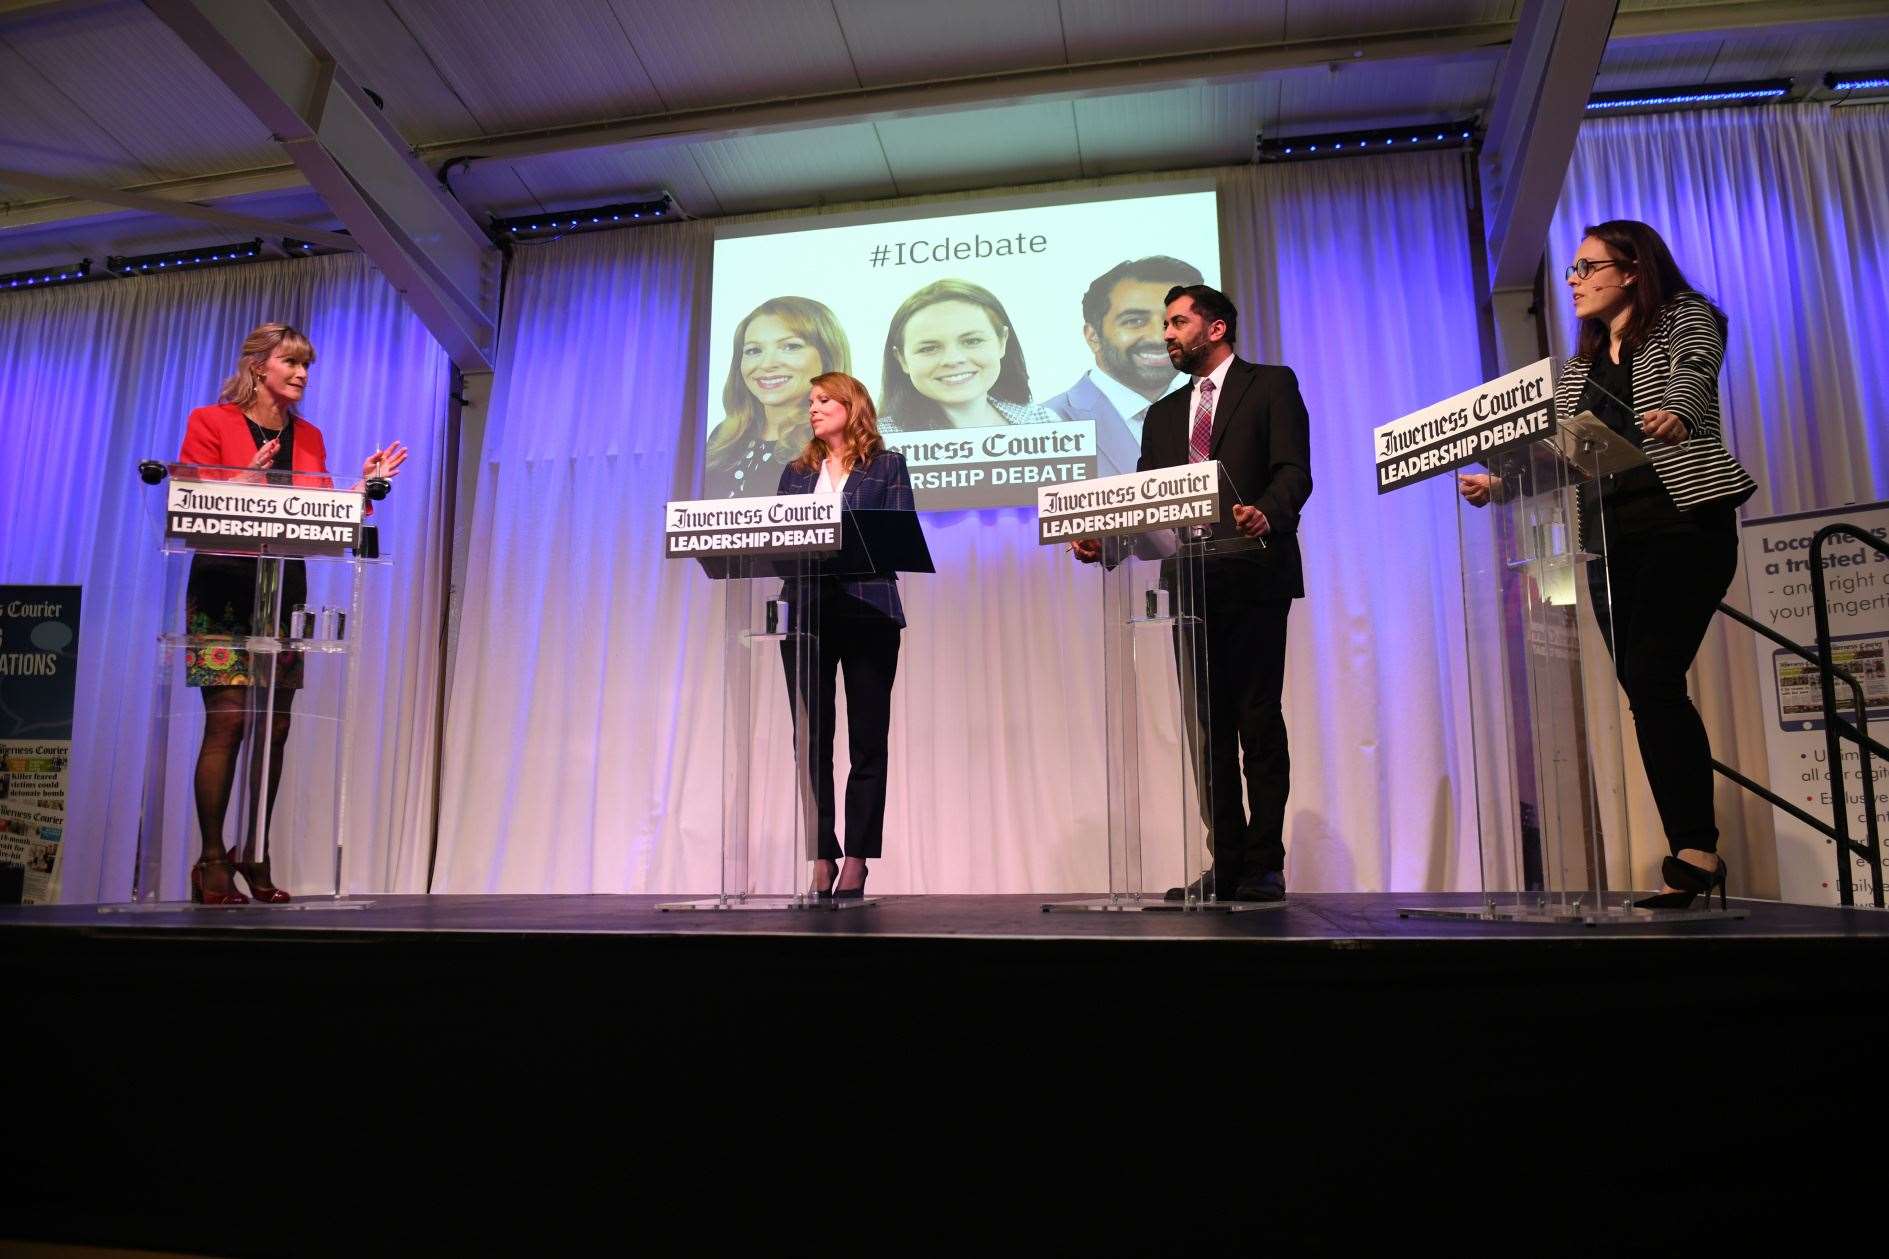 Nicky Marr, Ash Regan, Humzah Yousaf and Kate Forbes during the leadership debate in Inverness. Picture: James Mackenzie.